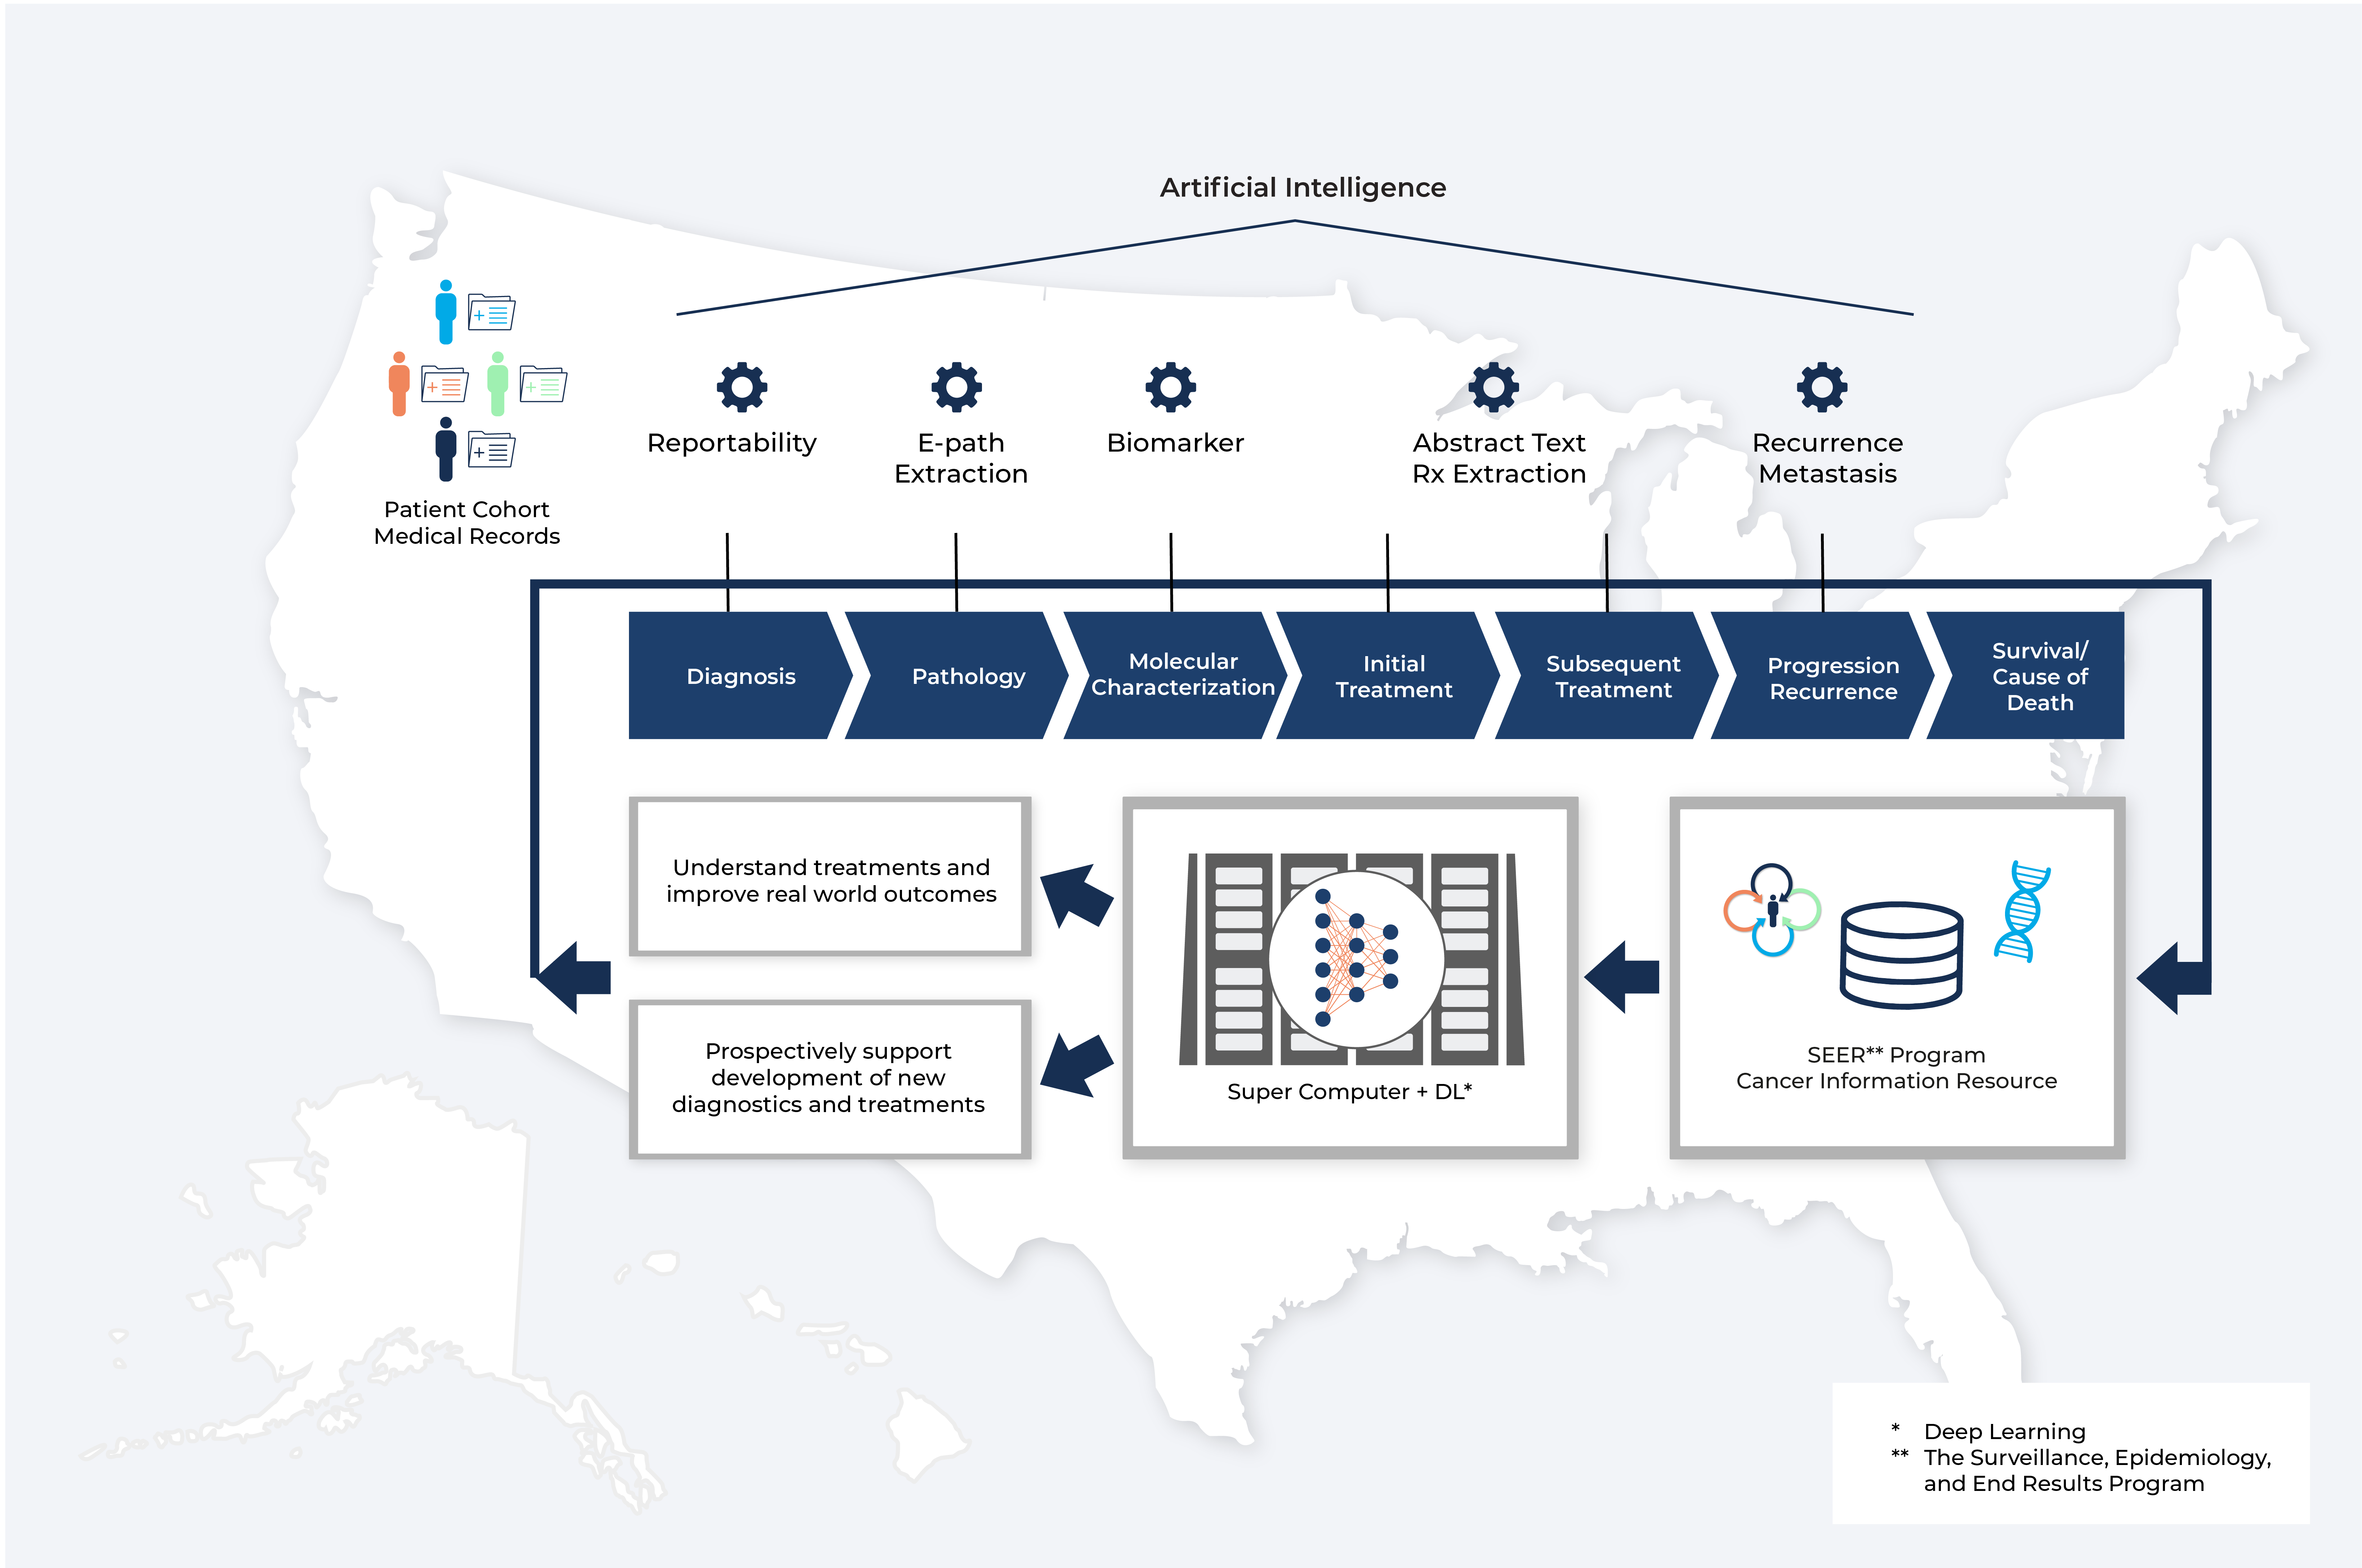 Image depicts how MOSSAIC uses electronic health records across the United States to predict patient outcomes through artificial intelligence. The artificial intelligence process includes diagnosis, pathology, molecular characterization, initial treatment, subsequent treatment, progression recurrence, and survival/cause of death. This flows into the Surveillance, Epidemiology, and End Results program, which flows into a super computer and deep learning, which splits off into understanding treatments and improving real world outcomes, and prospectively supporting the development of new diagnostics and treatments. 